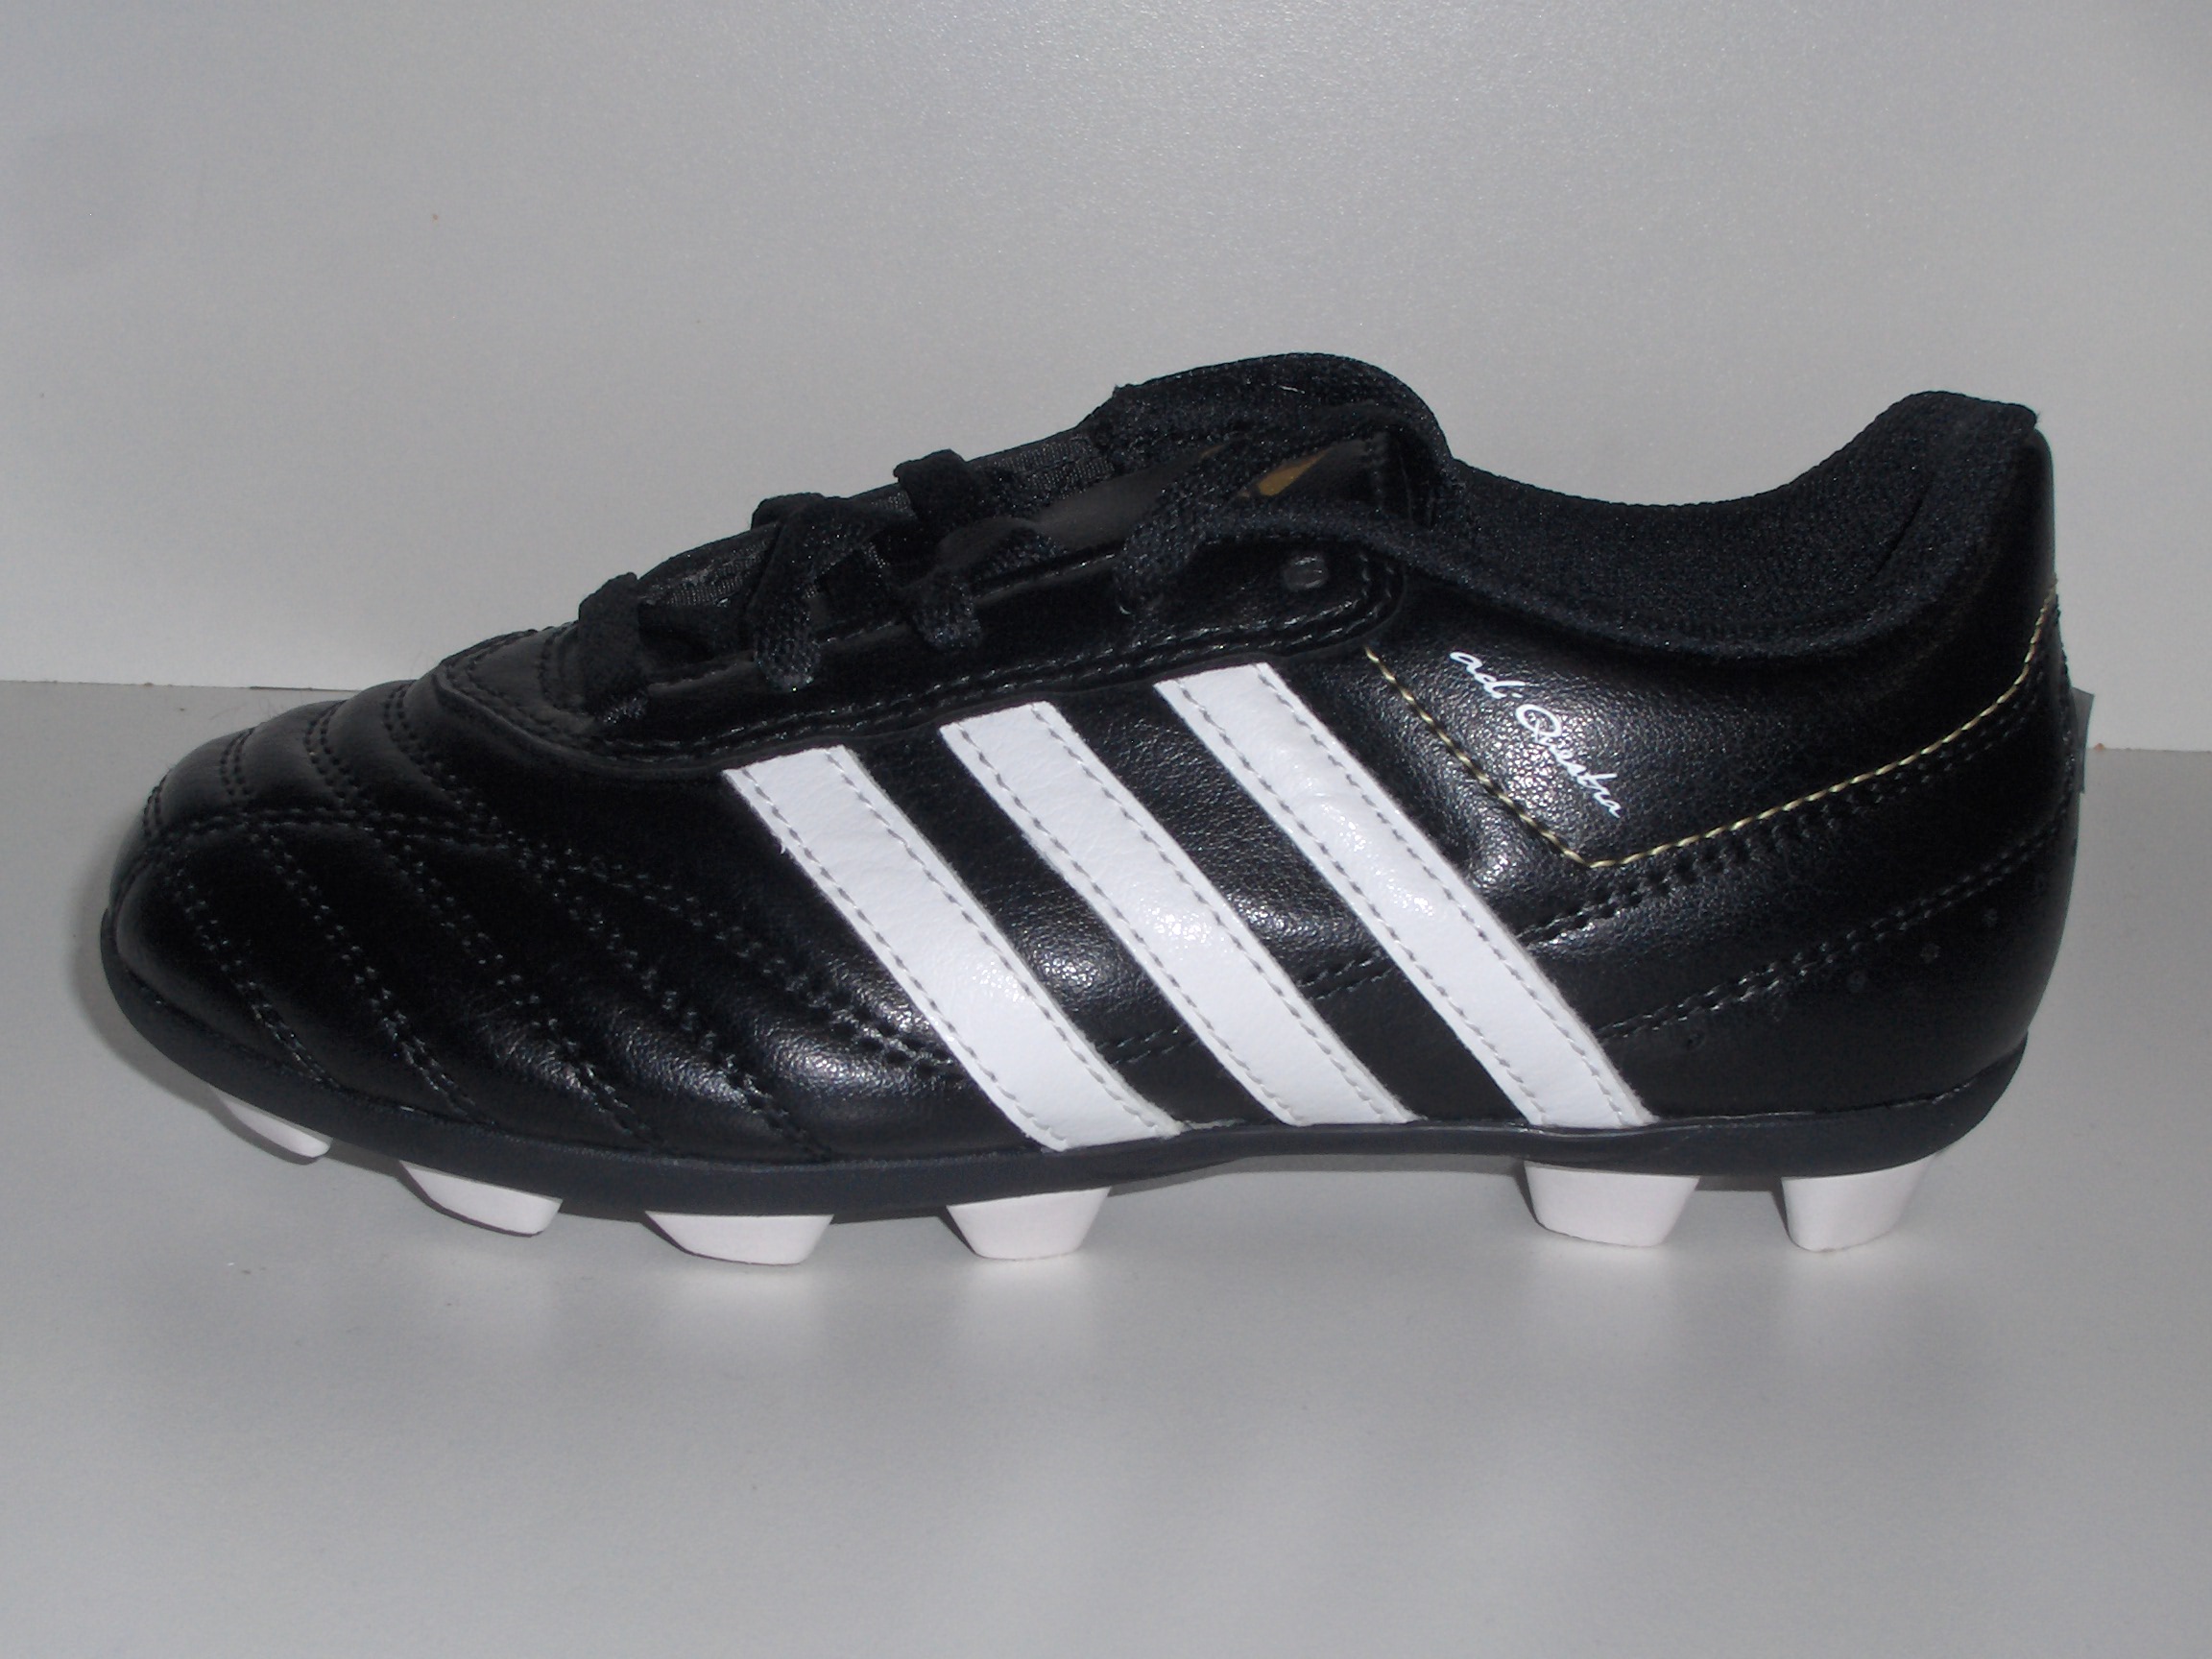 adidas soccer boots for kids